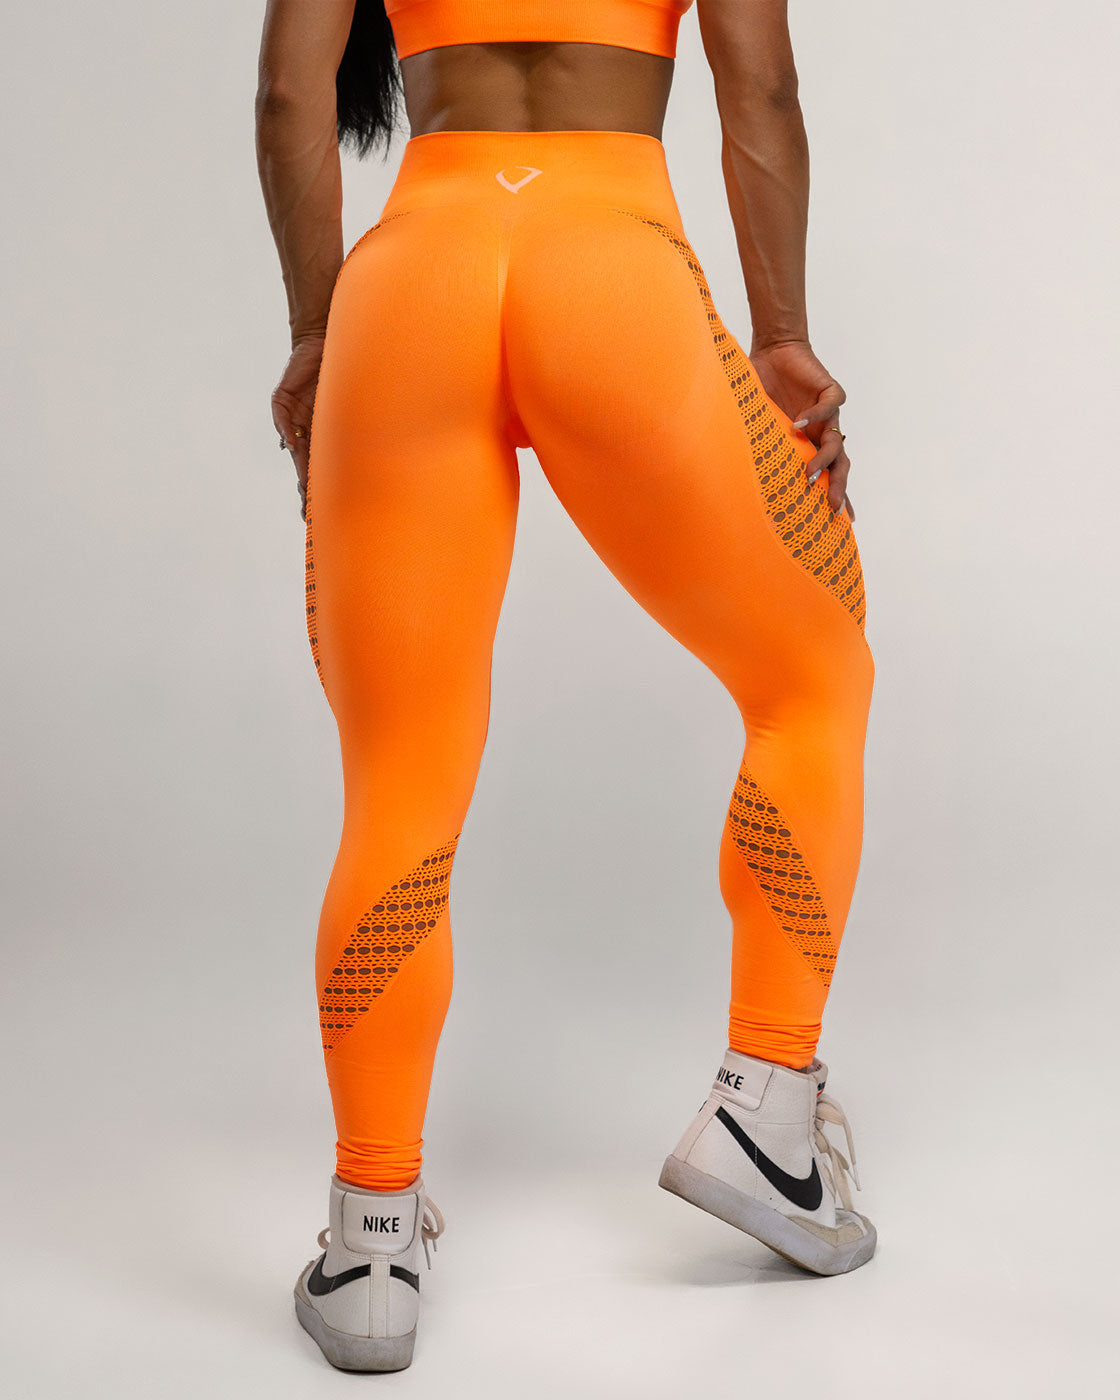 Solid Bright Mango Orange Color Leggings for Sale by Discounted